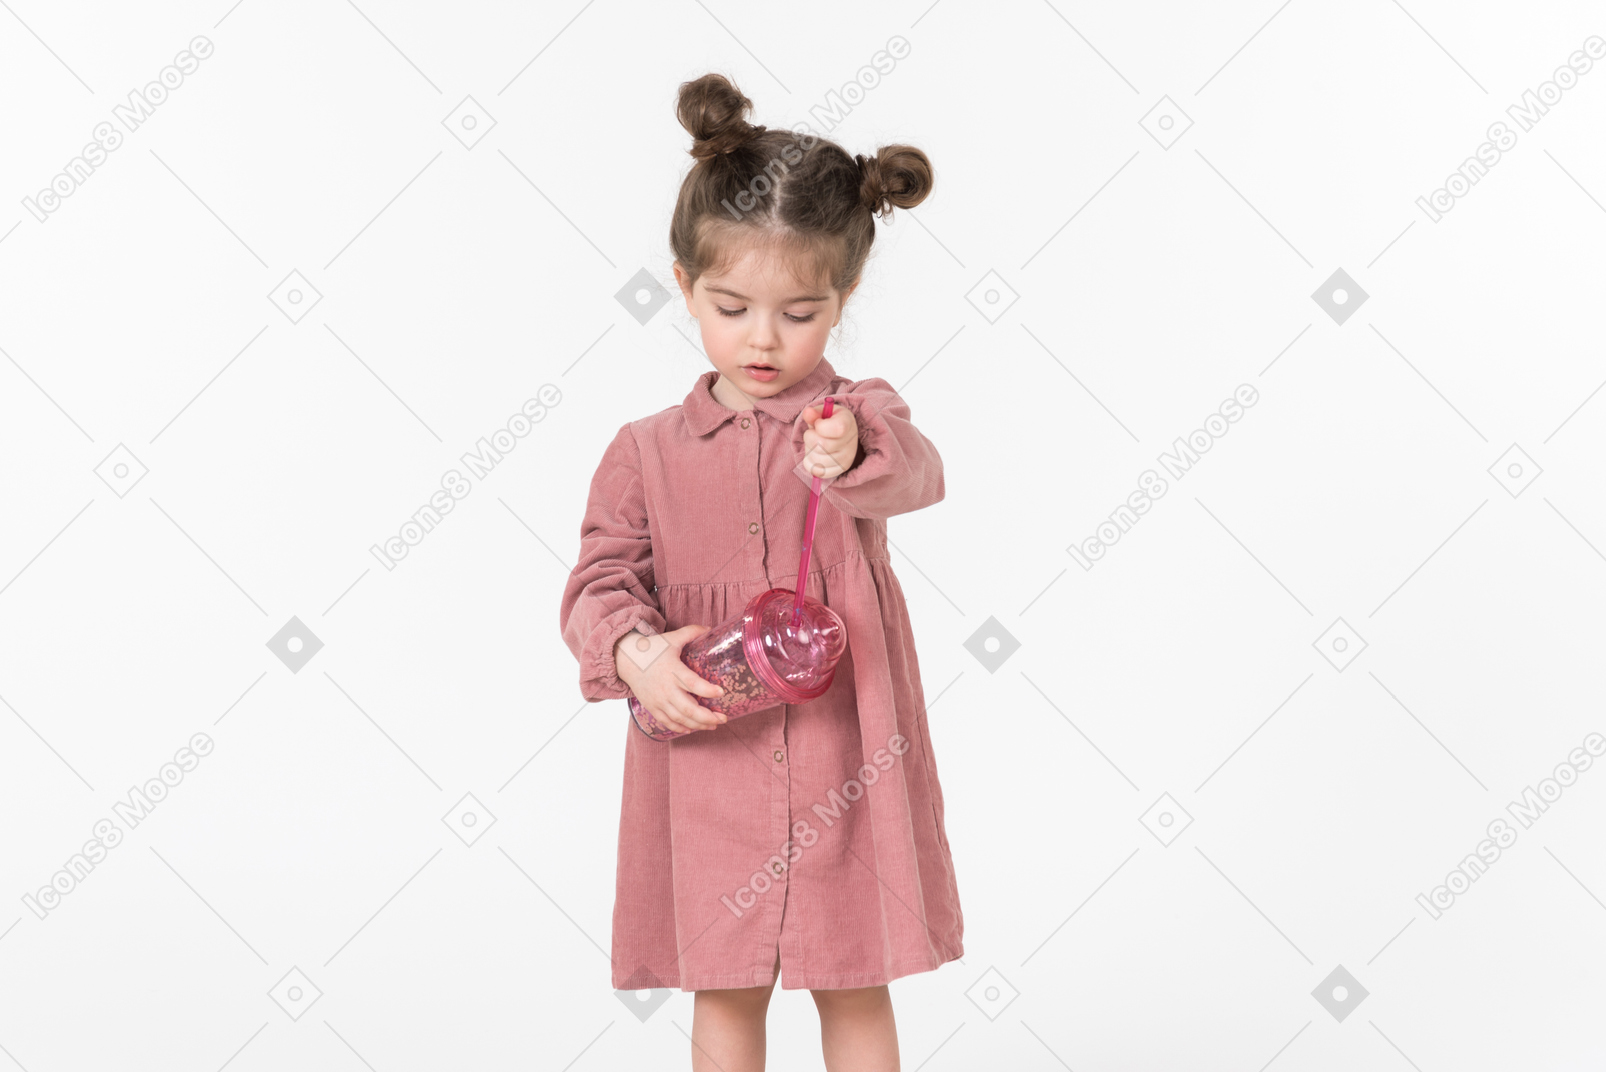 Little kid girl holding pink plastic cup